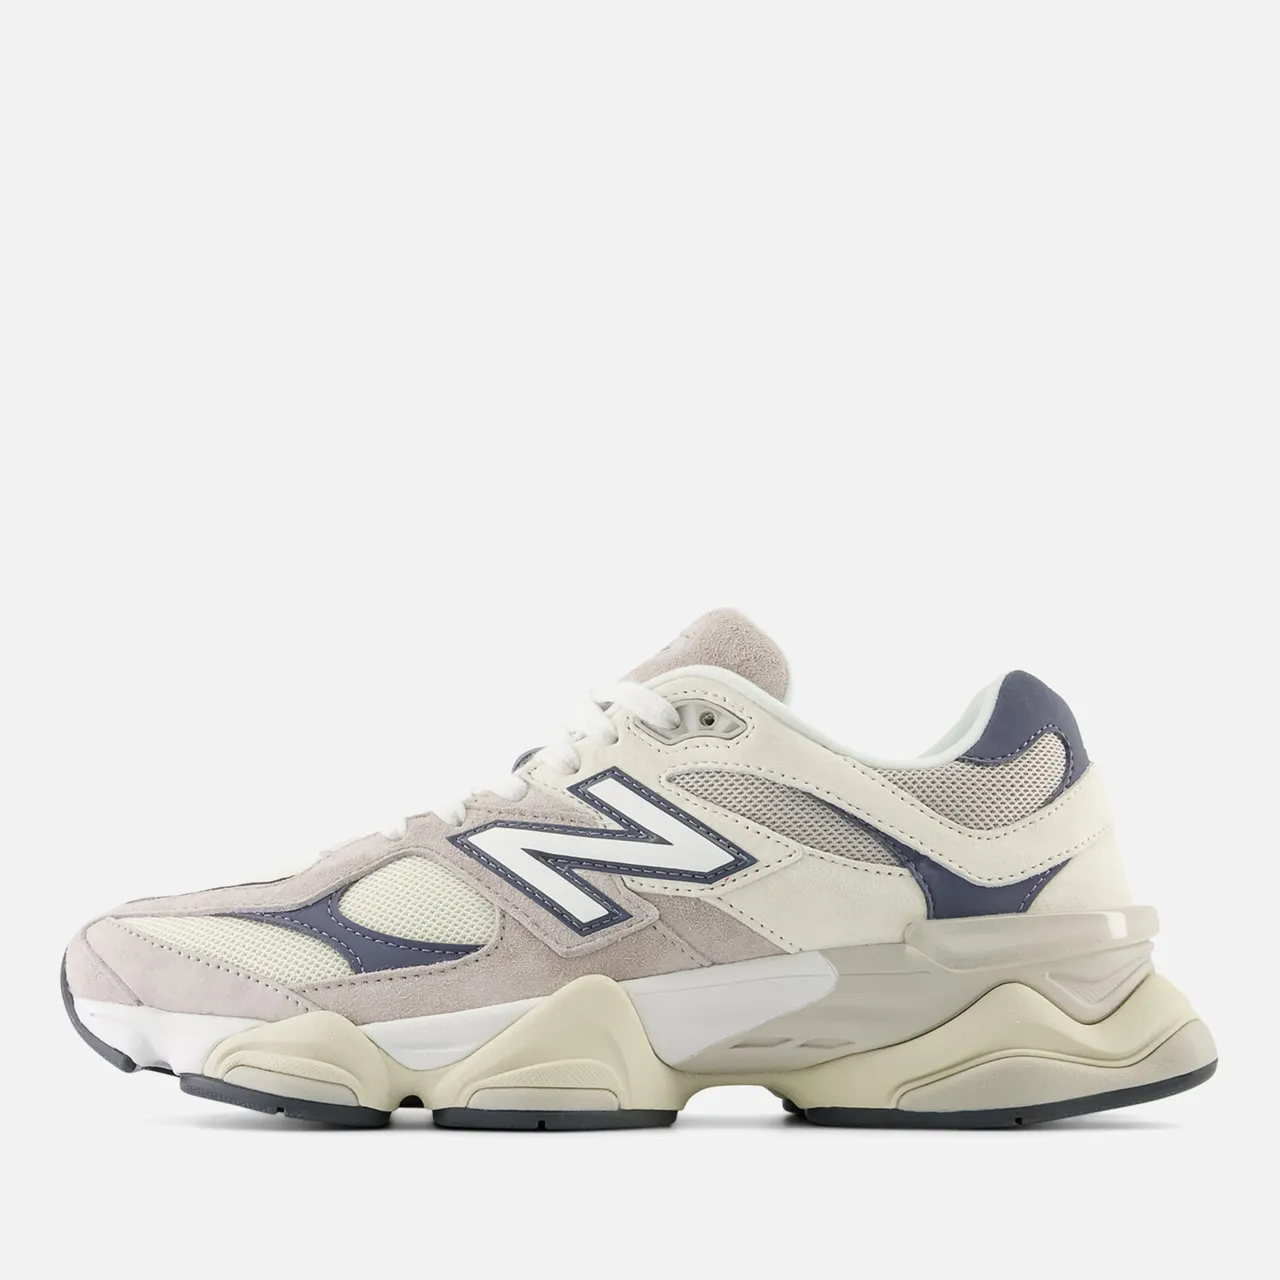 New Balance Men's 9060 Suede and Mesh Trainers - UK